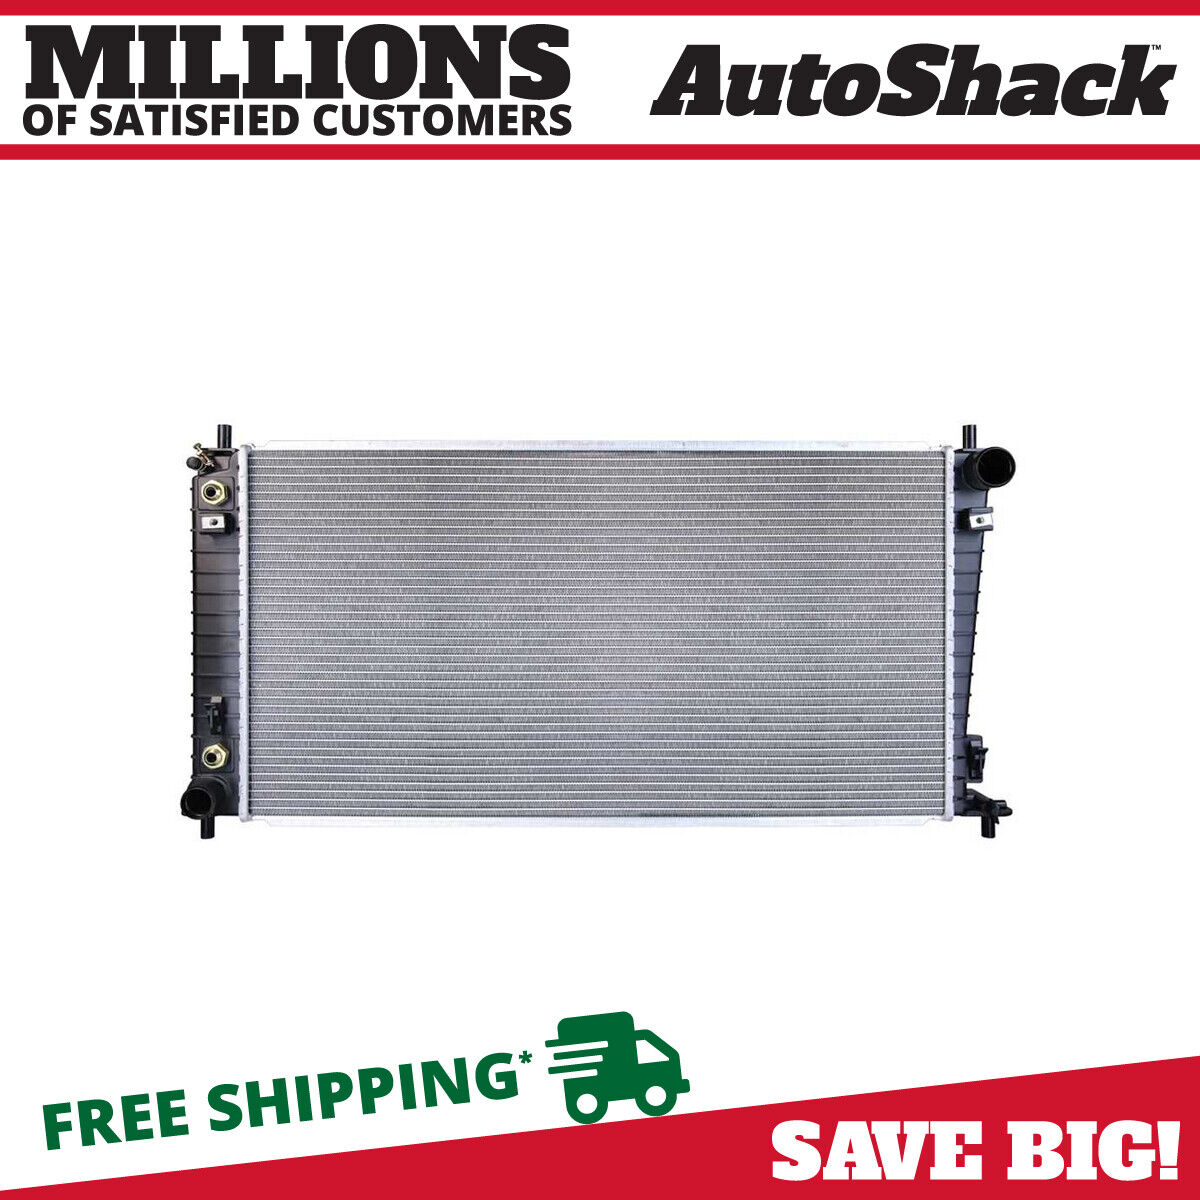 Radiator for Lincoln Mark LT Navigator 2004-2006 Ford Expedition 2005-2008 F-150